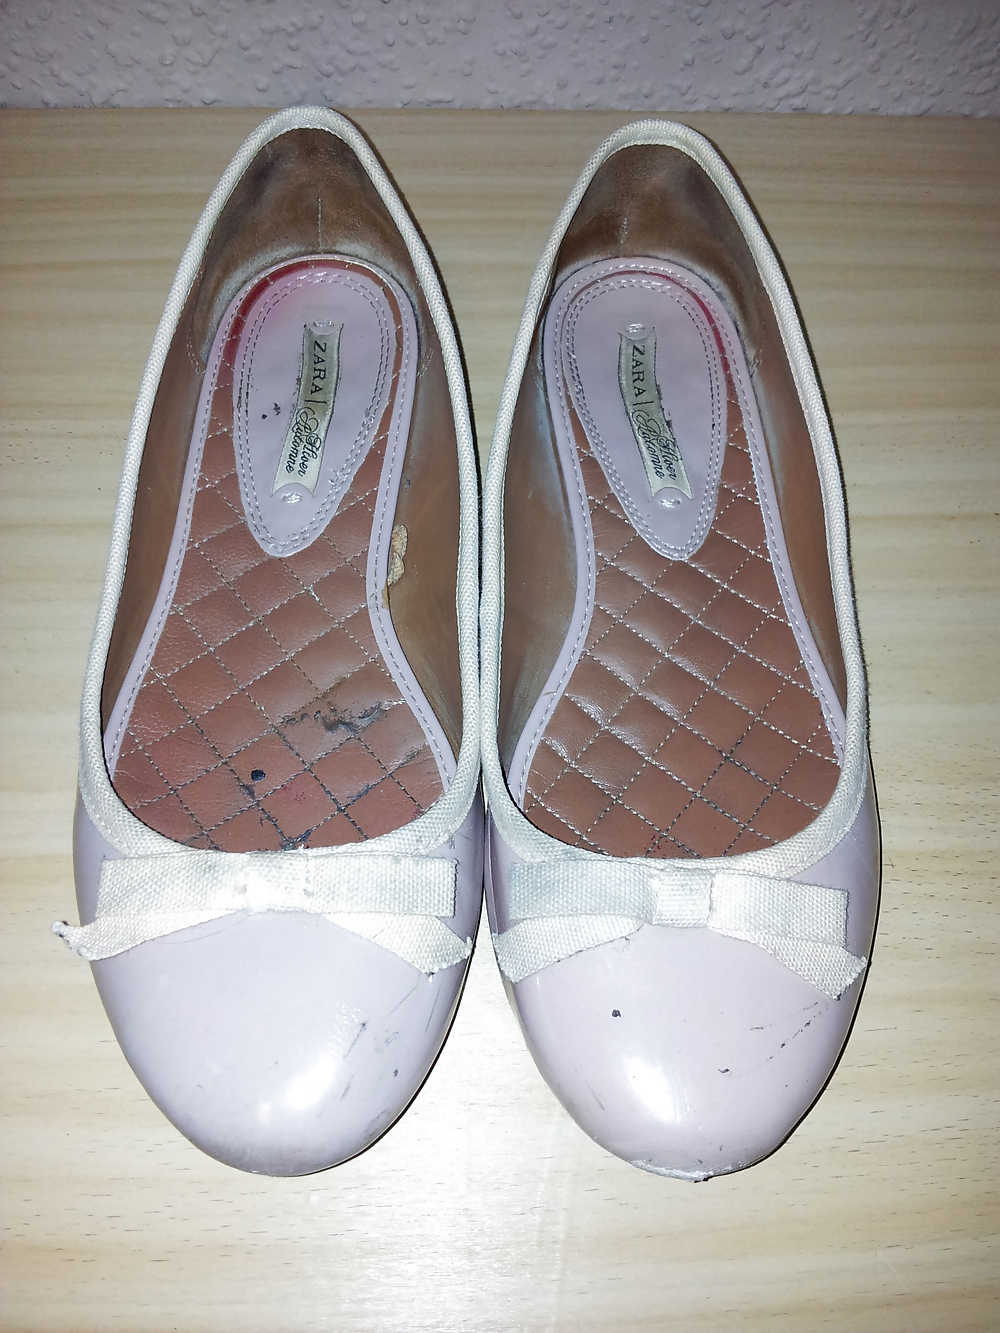 Wifes well worn nude lack Ballerinas flats shoes2 #19093492